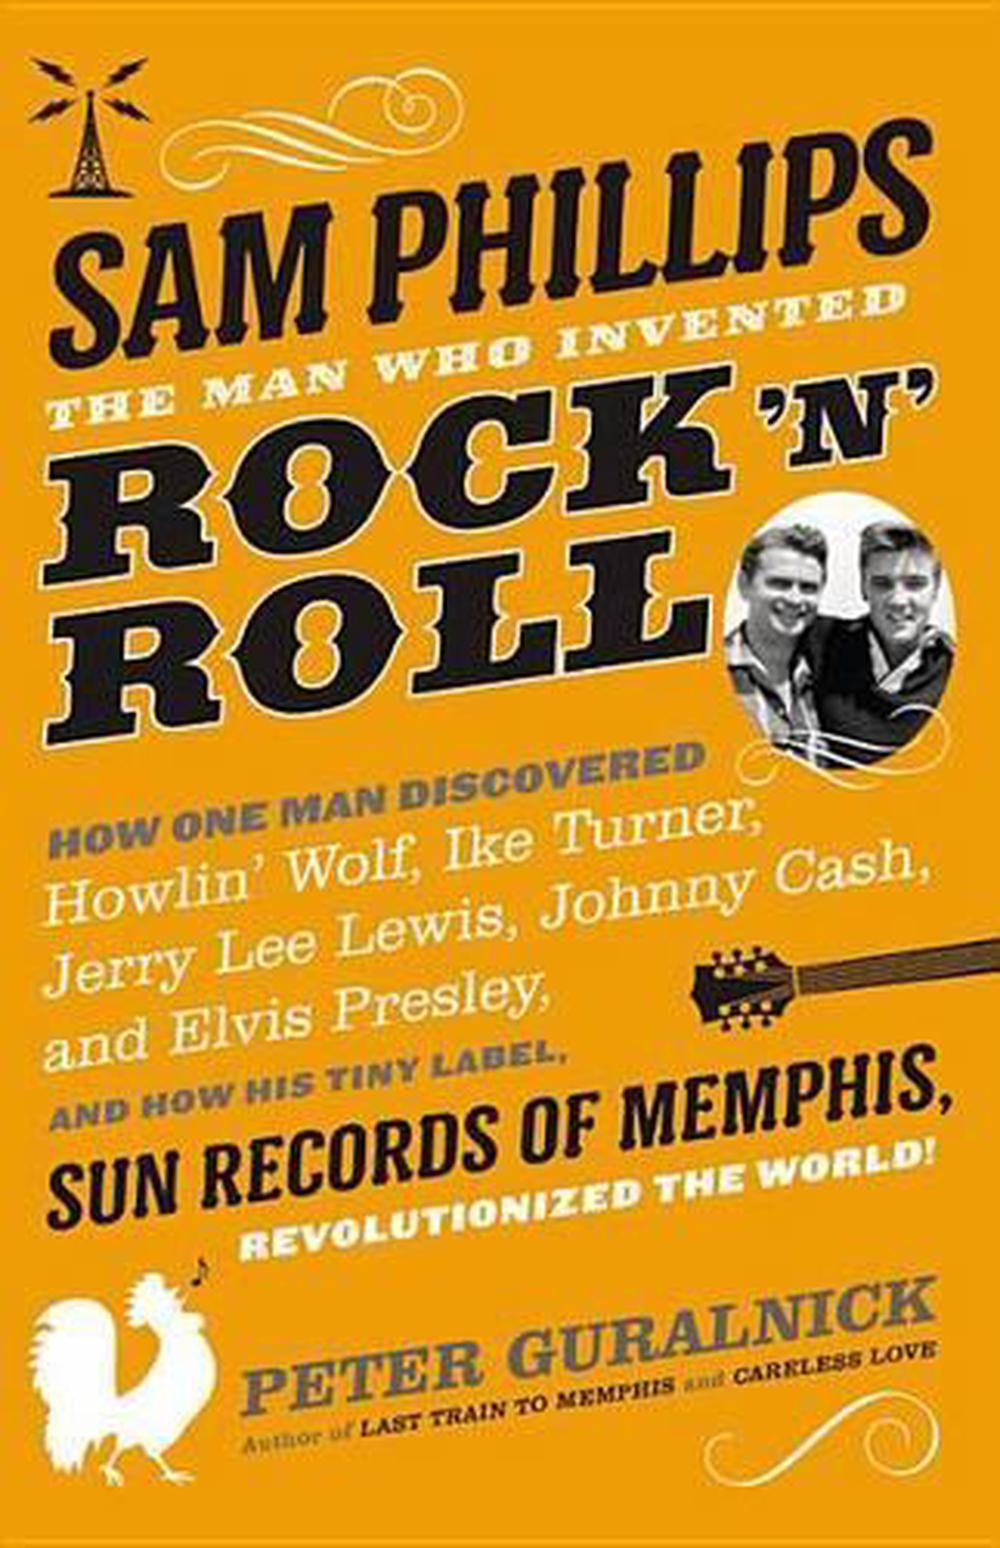 sam phillips the man who invented rock and roll